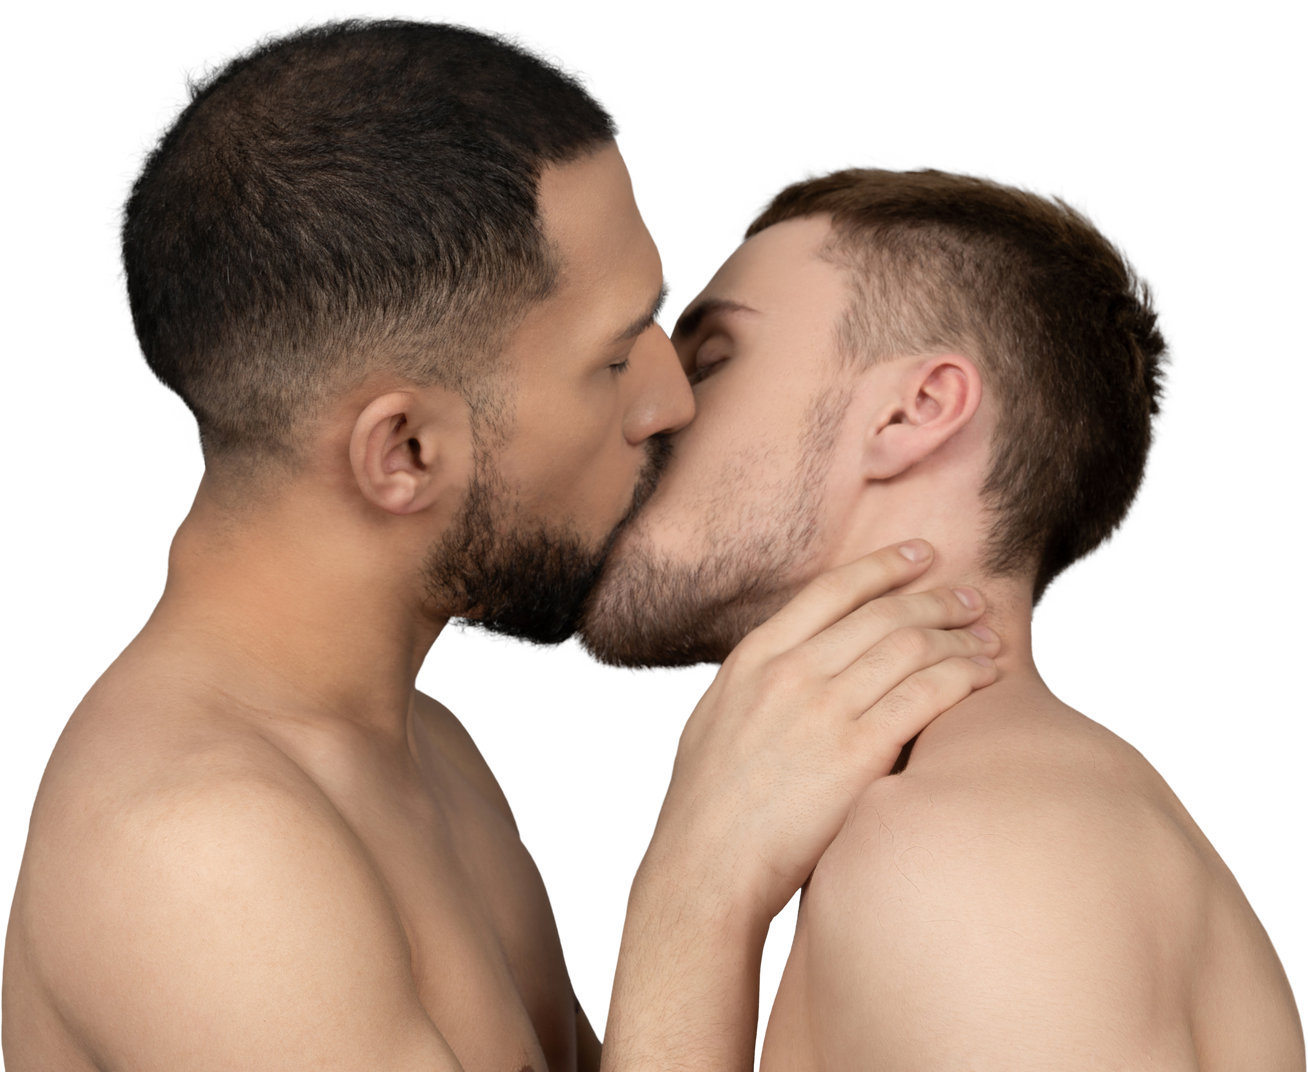 two gay men making out